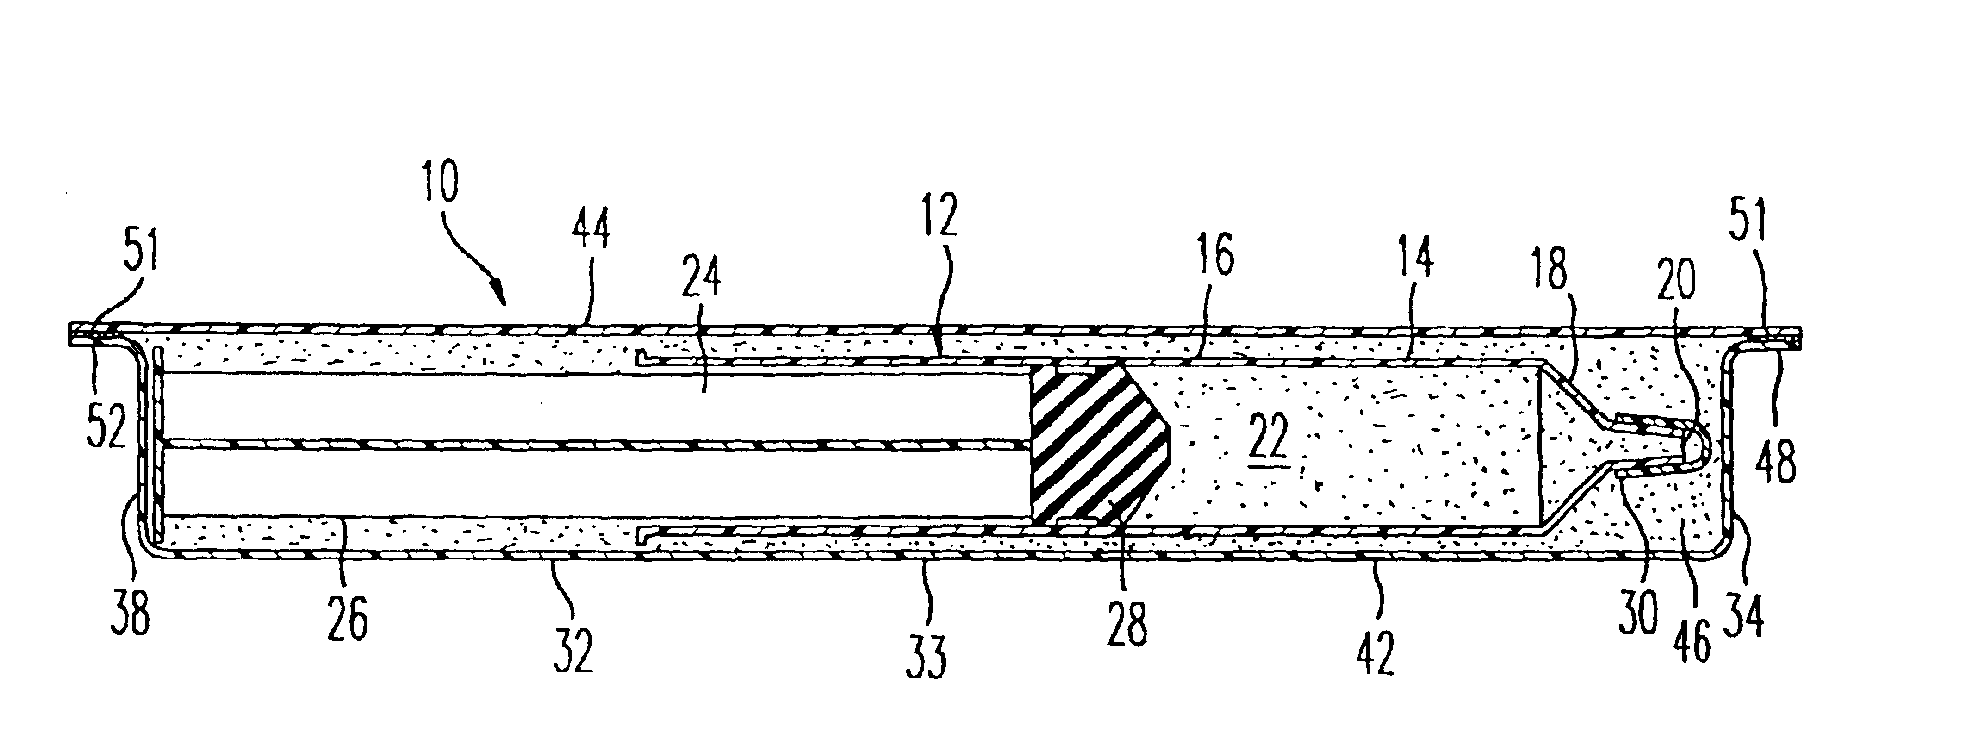 Pre-filled package containing unit dose of medical gas and method of making the same